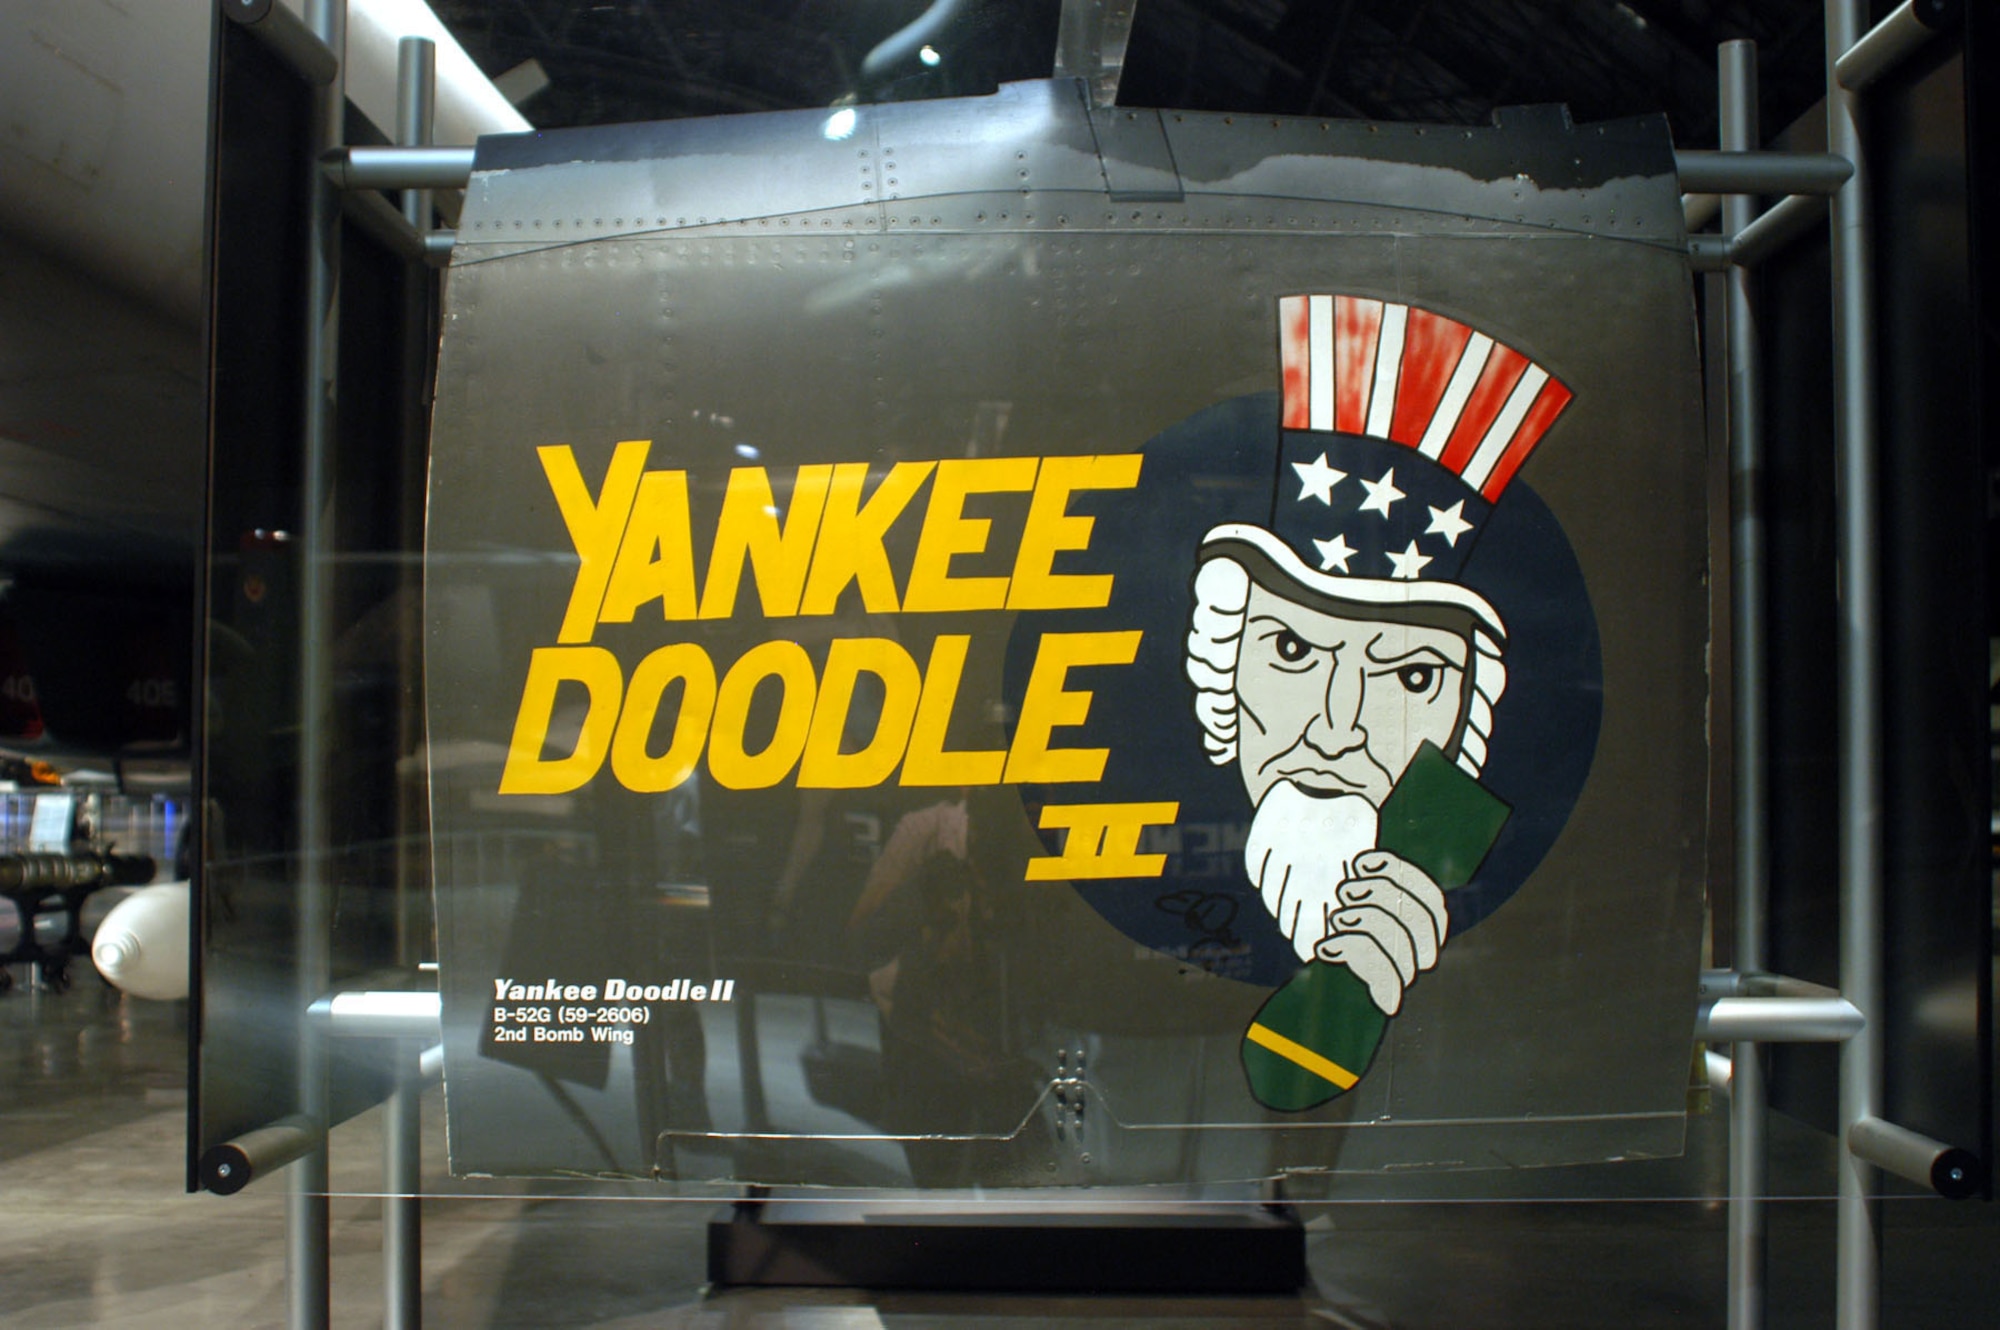 DAYTON, Ohio -- "Yankee Doodle II" nose art from a Boeing B-52G on display in the Cold War Gallery at the National Museum of the United States Air Force. (U.S. Air Force photo)